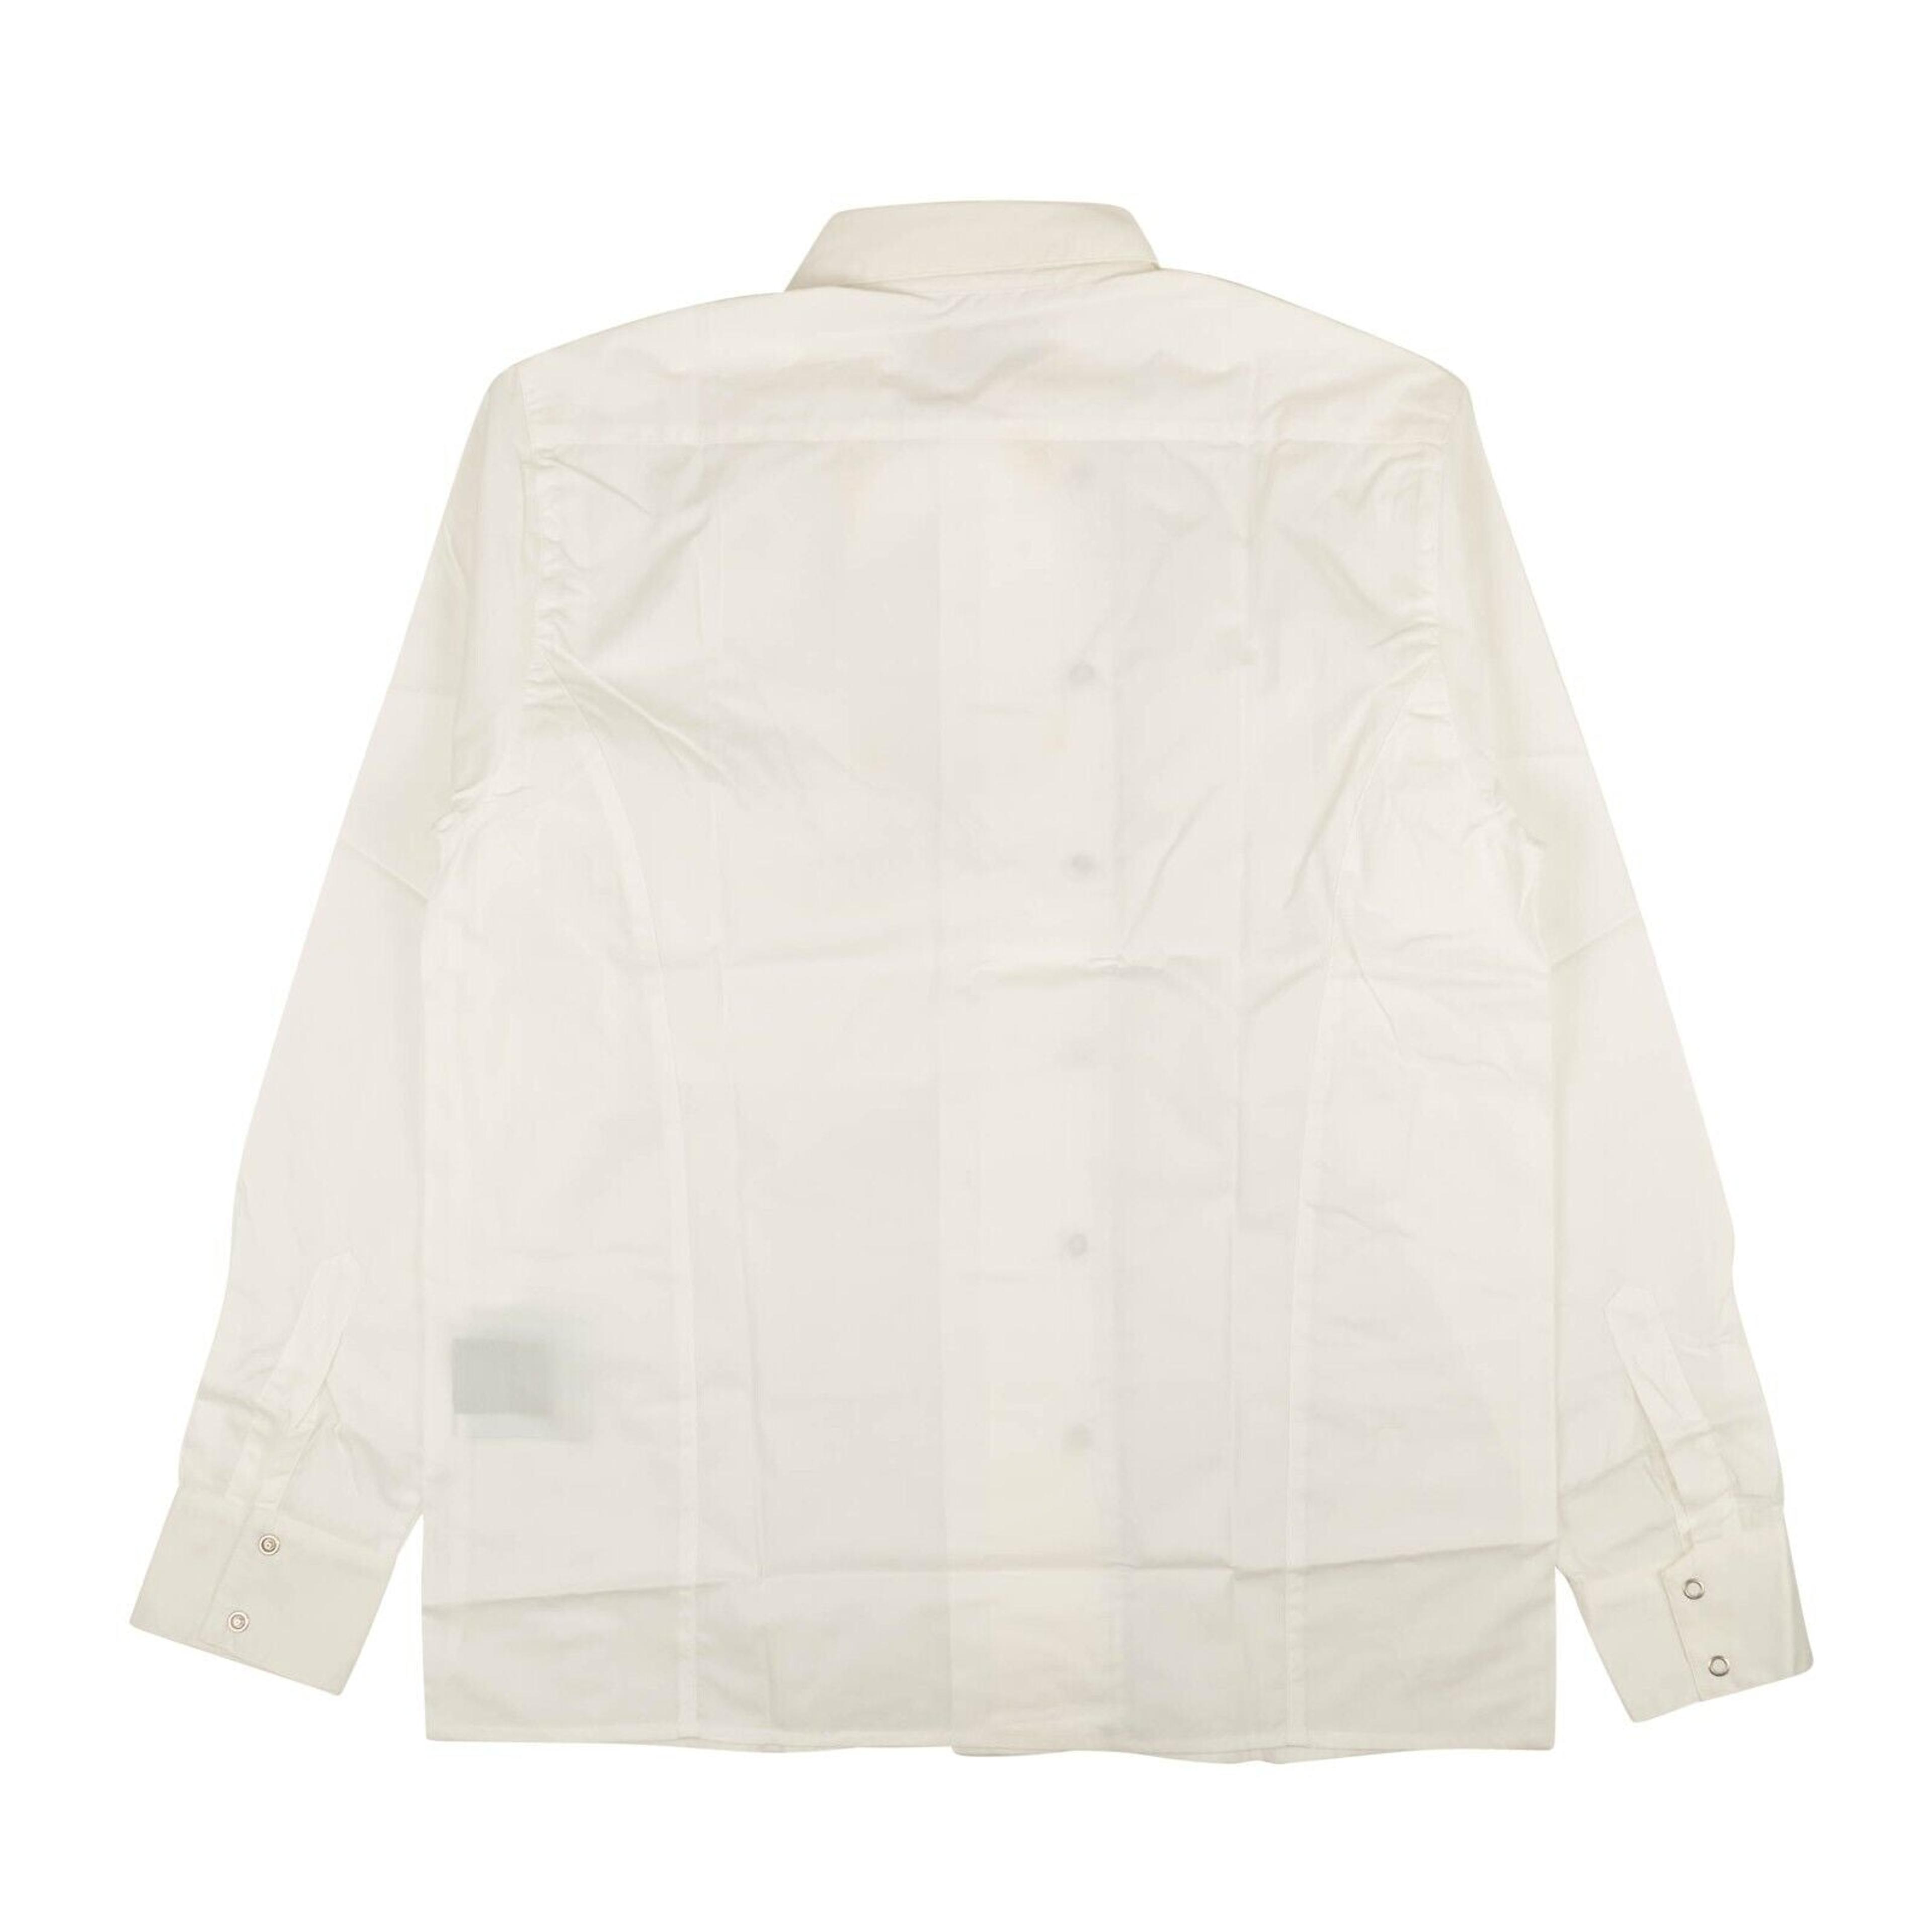 Alternate View 2 of White Snap Long Sleeve Button Down Shirt